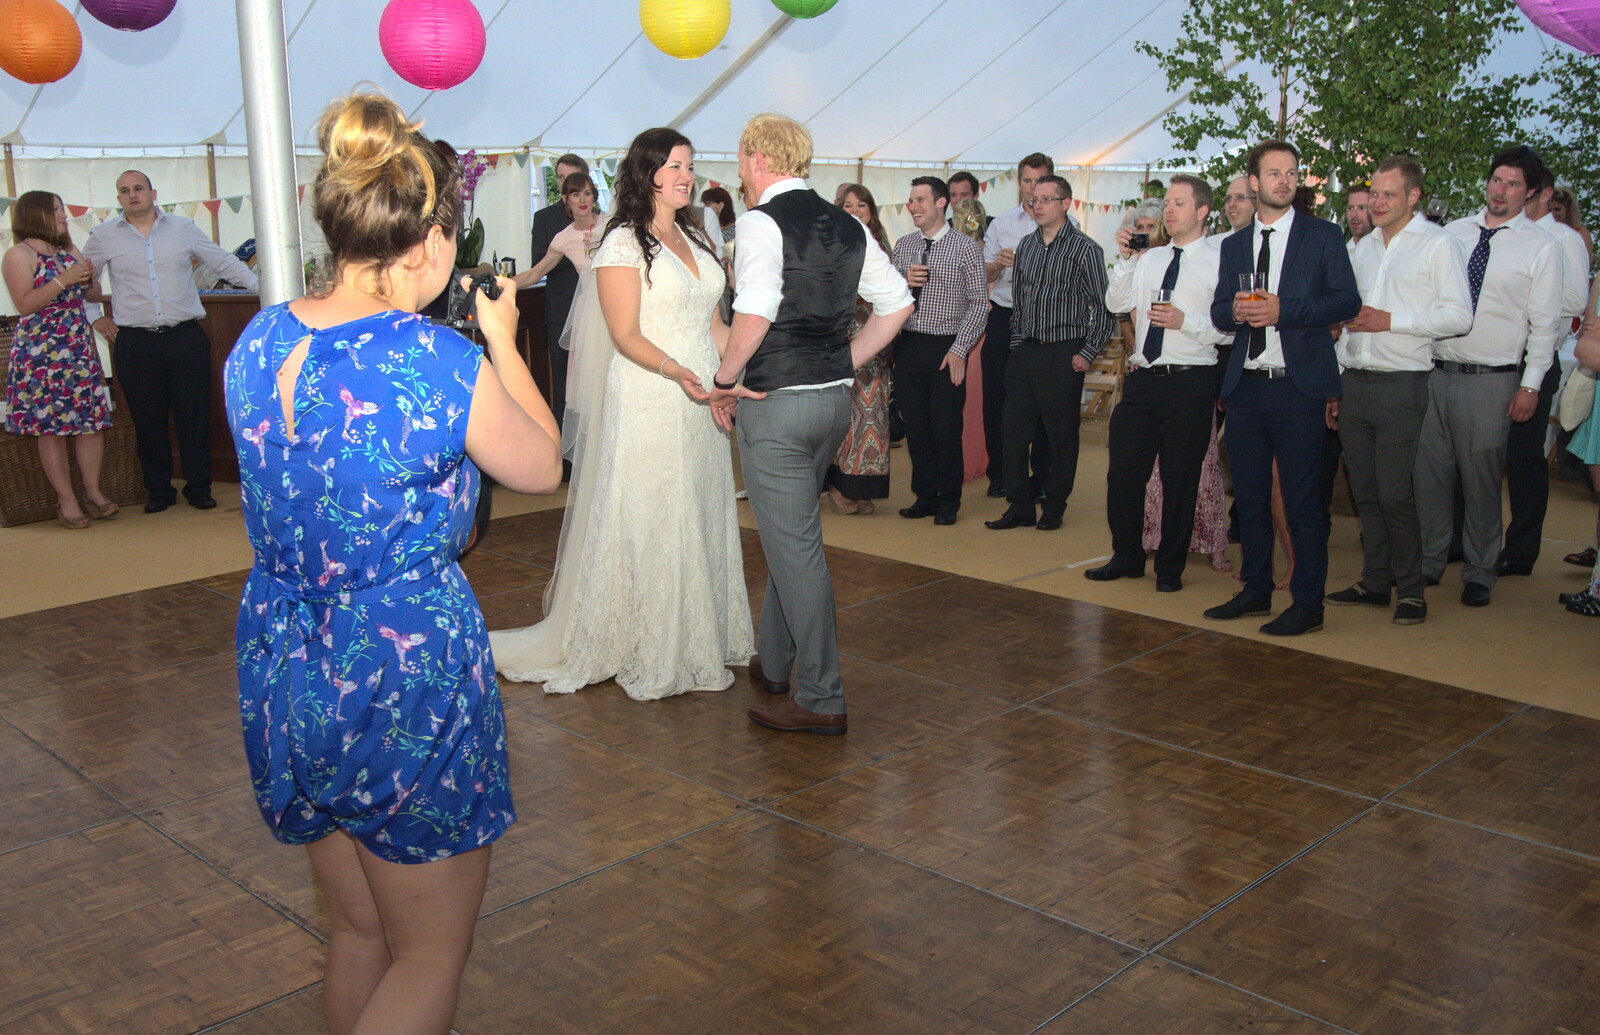 Will and Steph do the first dance from The BBs Play Steph's Wedding, Burston, Norfolk - 13th July 2013